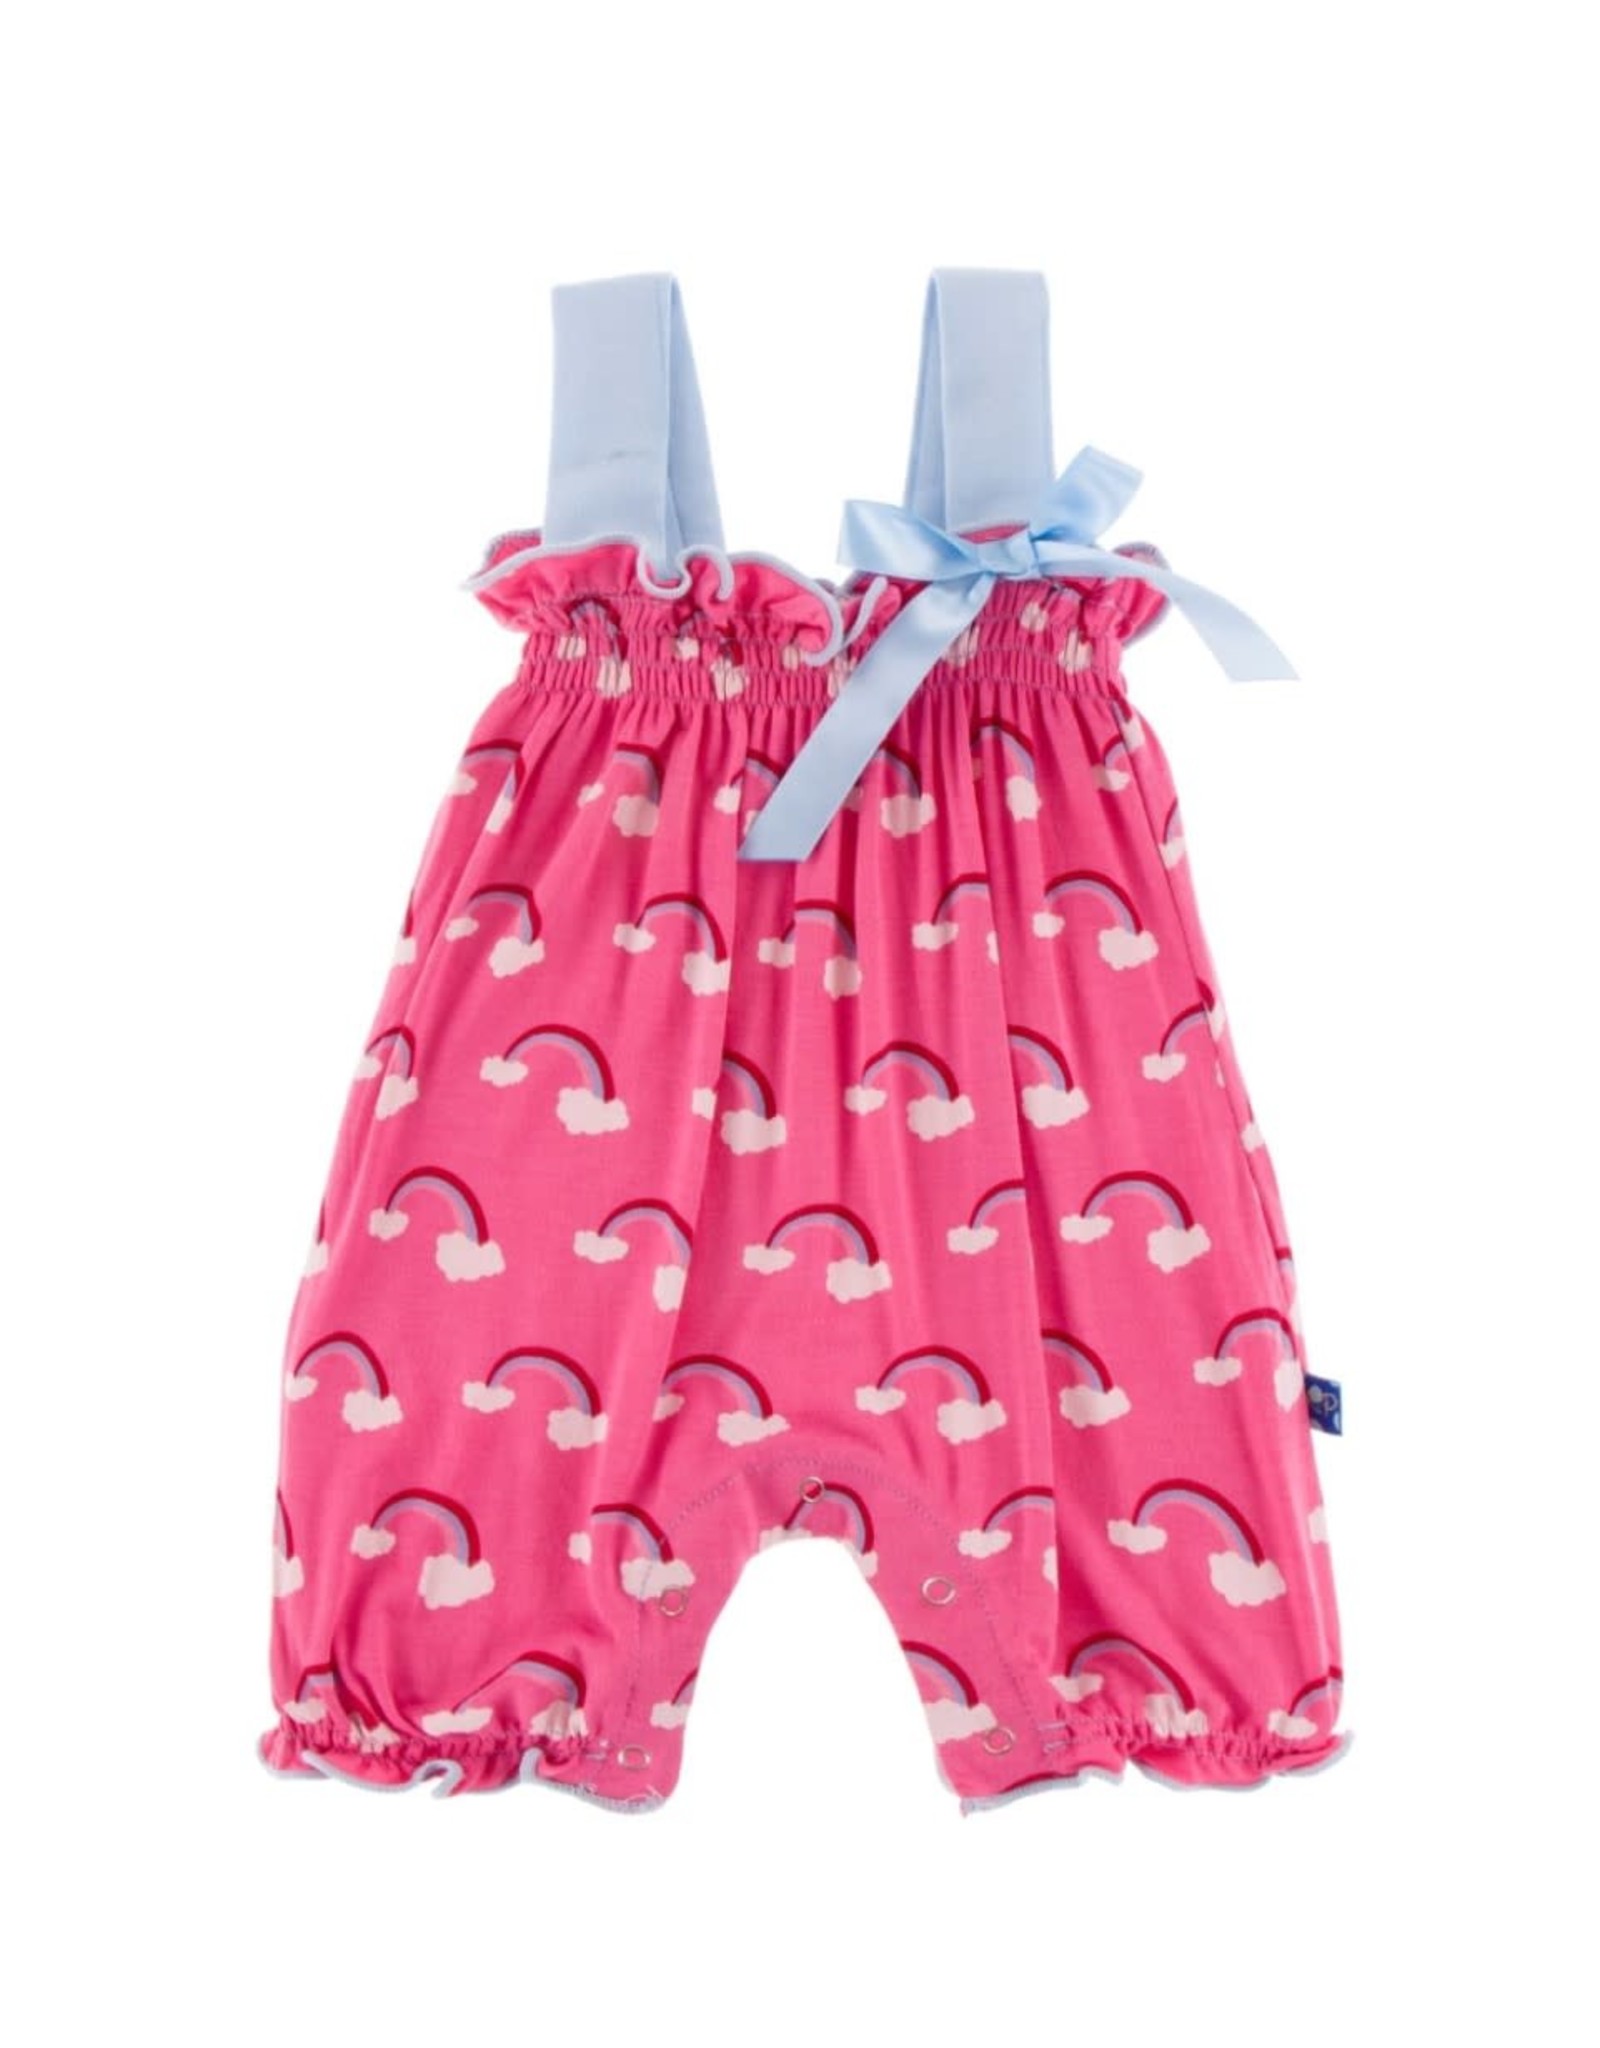 Kickee Pants Print Gathered Romper with Bow in Flamingo Rainbow 18-24 months